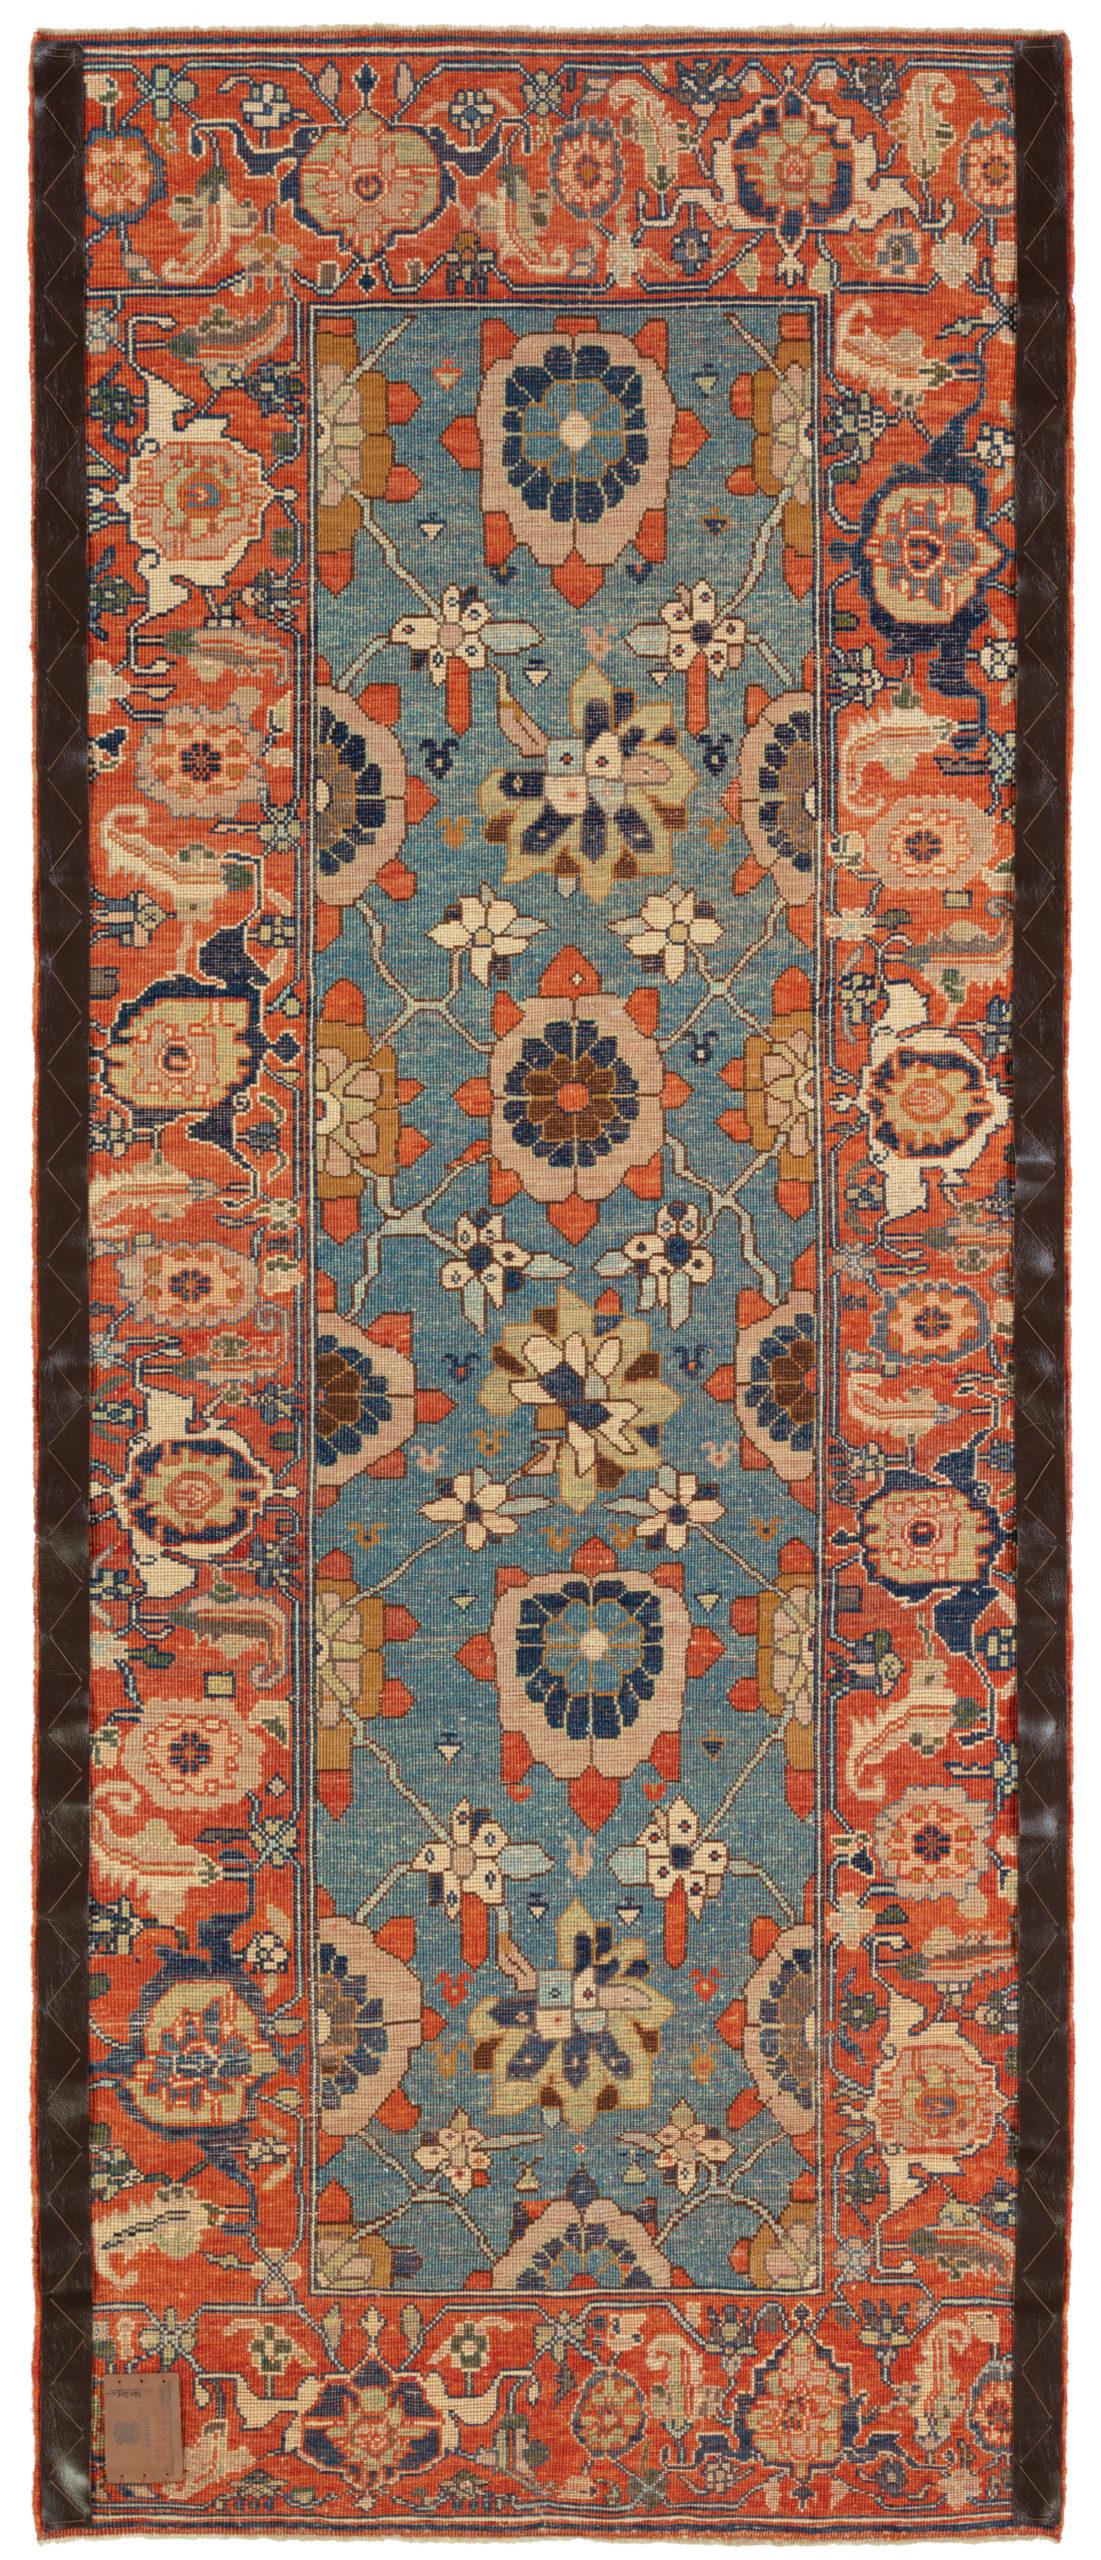 The design source of the rug comes from the book Antique Rugs of Kurdistan A Historical Legacy of Woven Art, James D. Burns, 2002 nr.4. This was an exclusive example of a Mina Khani lattice design mid-19th century rug from Koliya’i, Southern